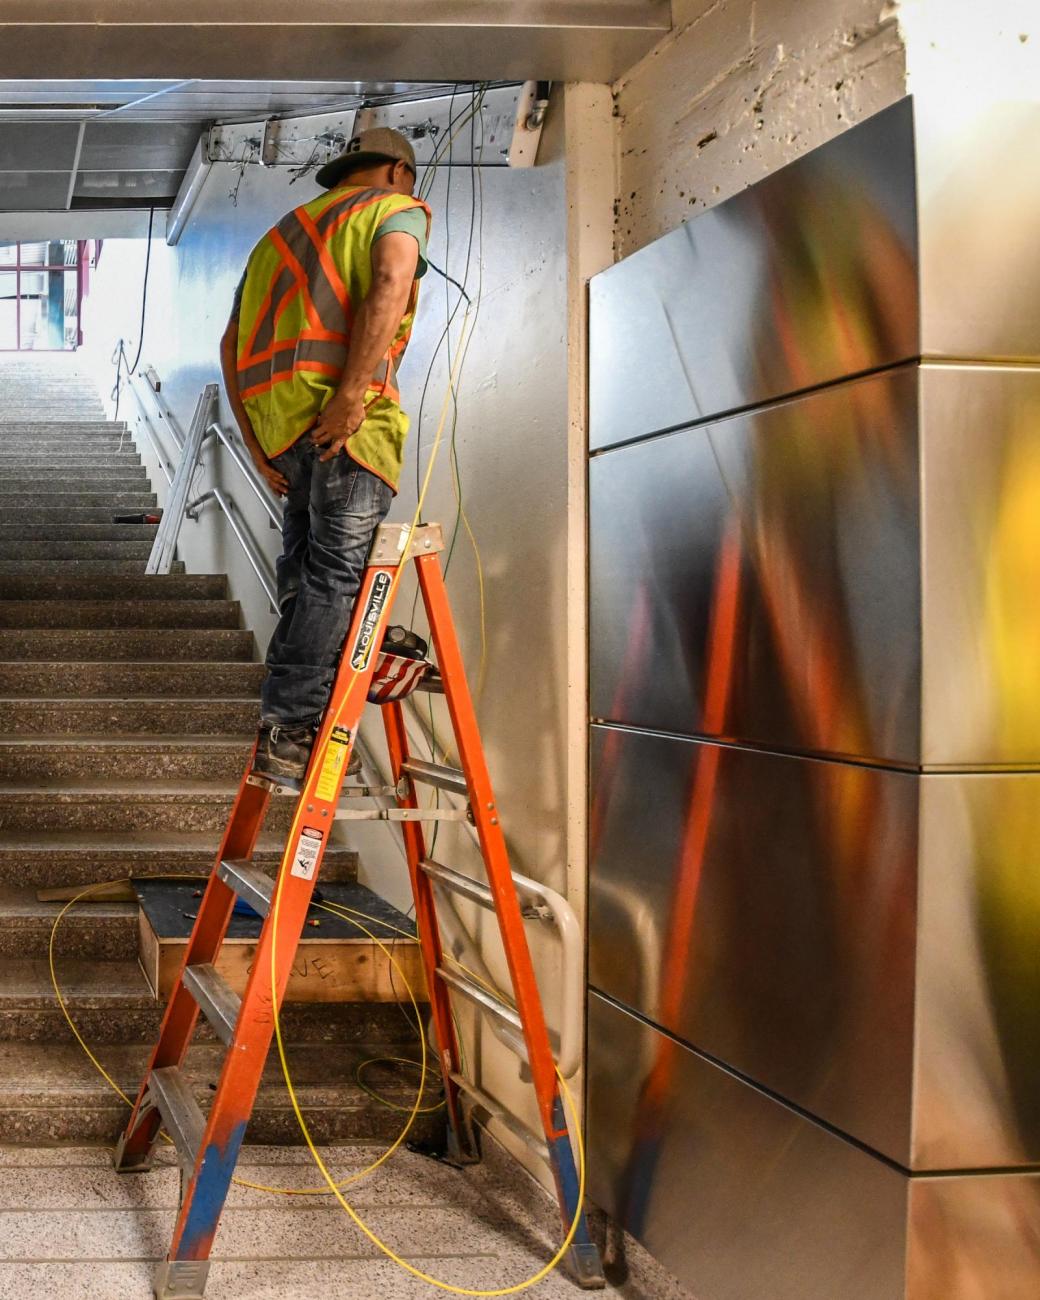 A crewman on a ladder near stairs in Wollaston Station, in the final stages of renovation. (August 7, 2019)